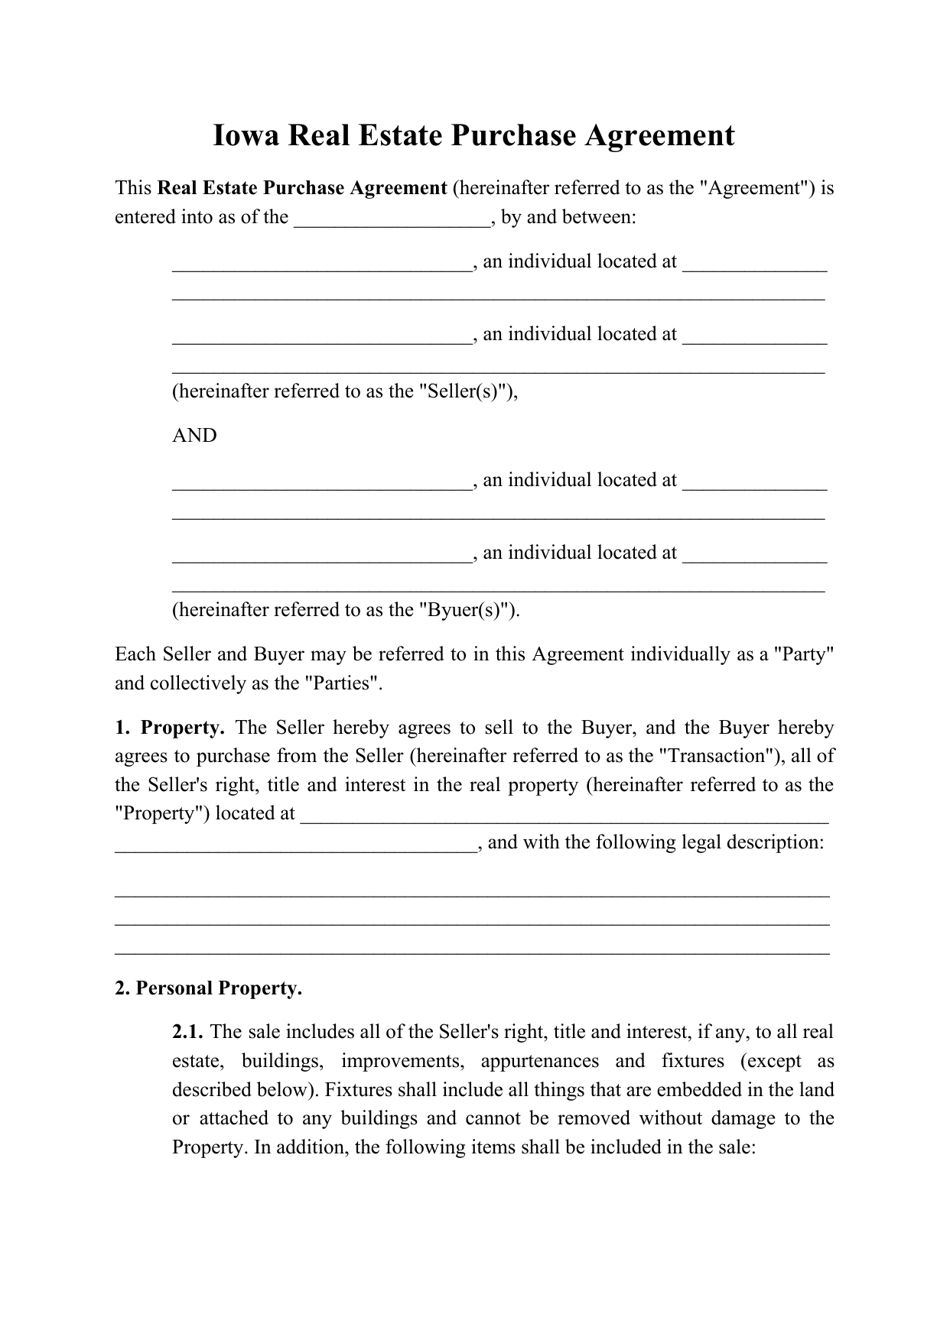 Real Estate Purchase Agreement Template - Iowa, Page 1